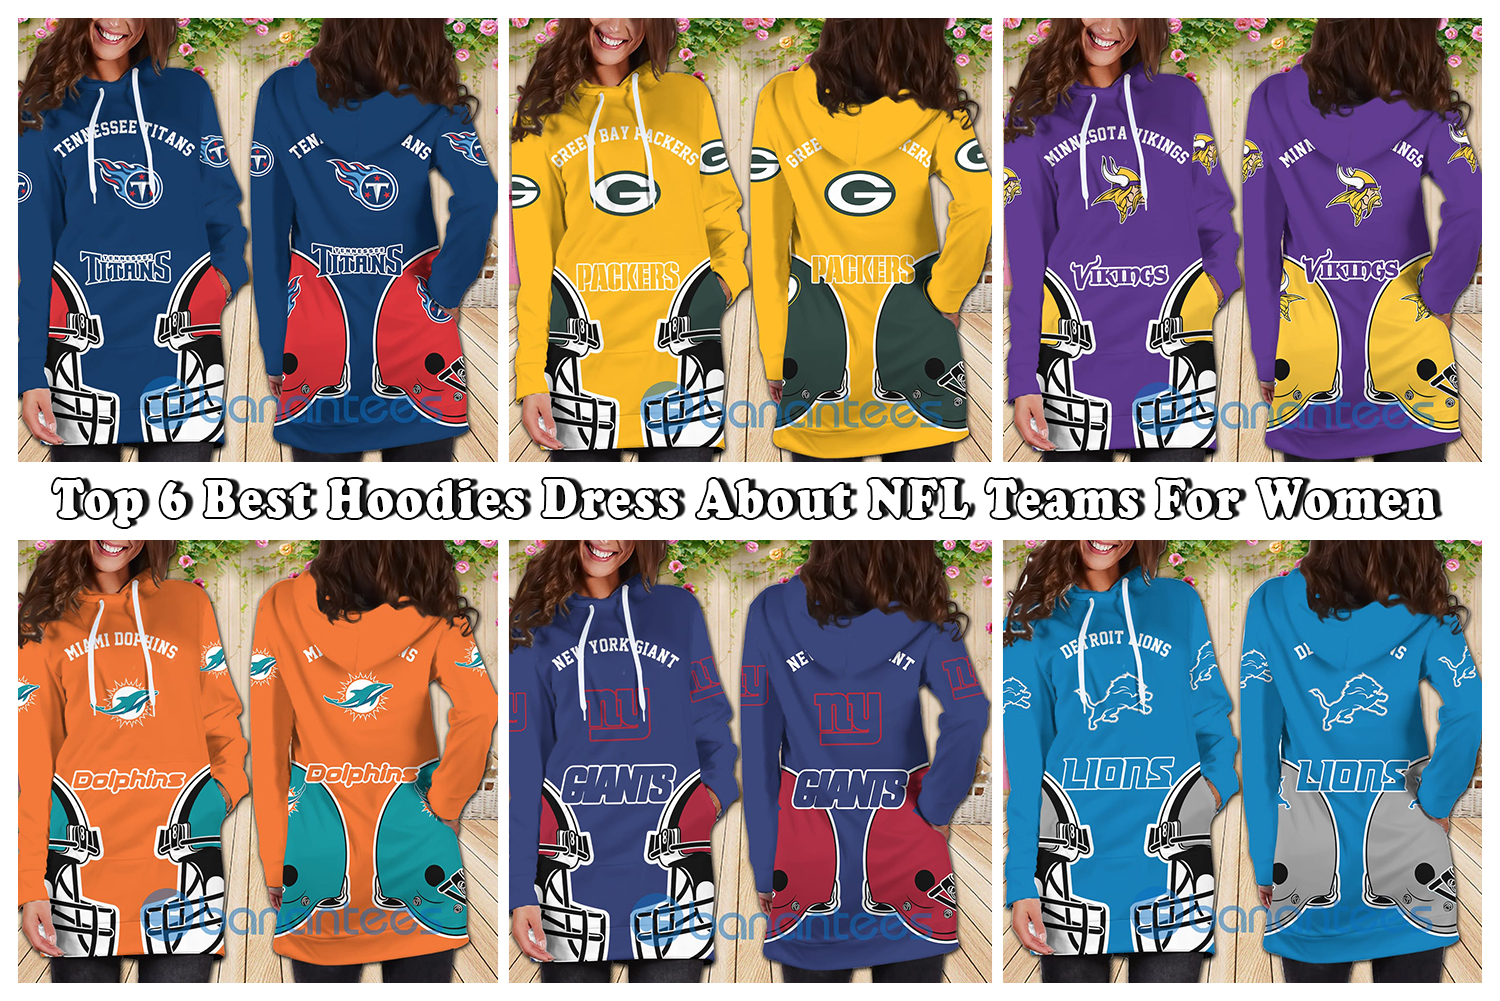 Top 6 Best Hoodies Dress About NFL Teams For Women